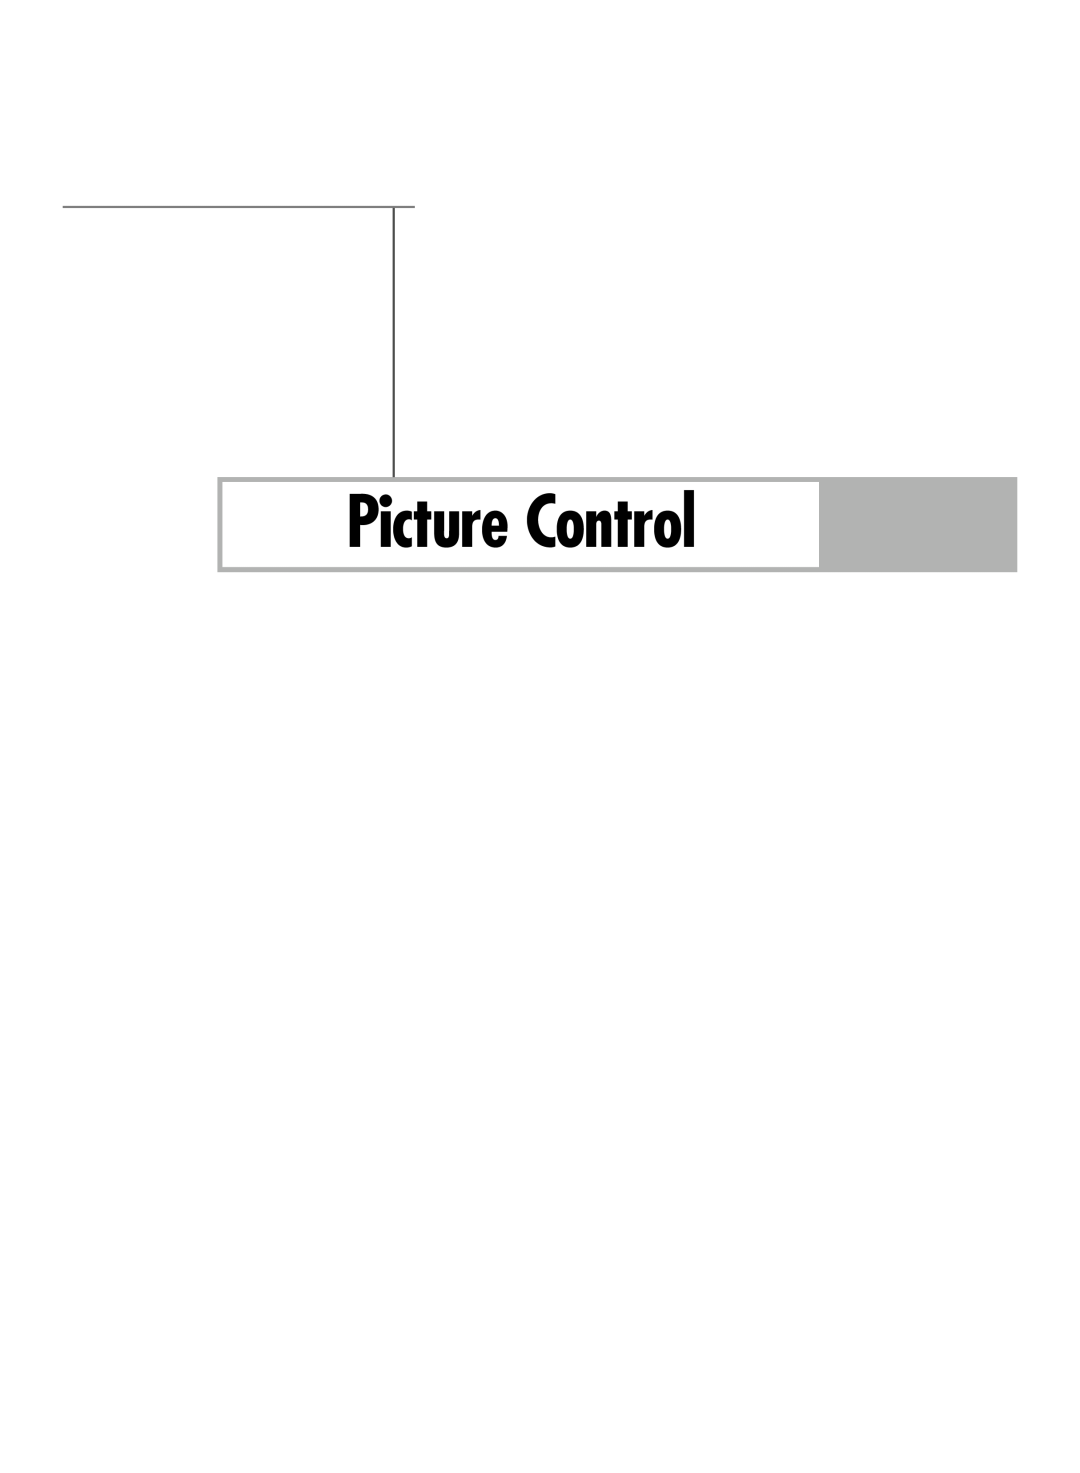 Samsung HL-R5688W manual Picture Control 